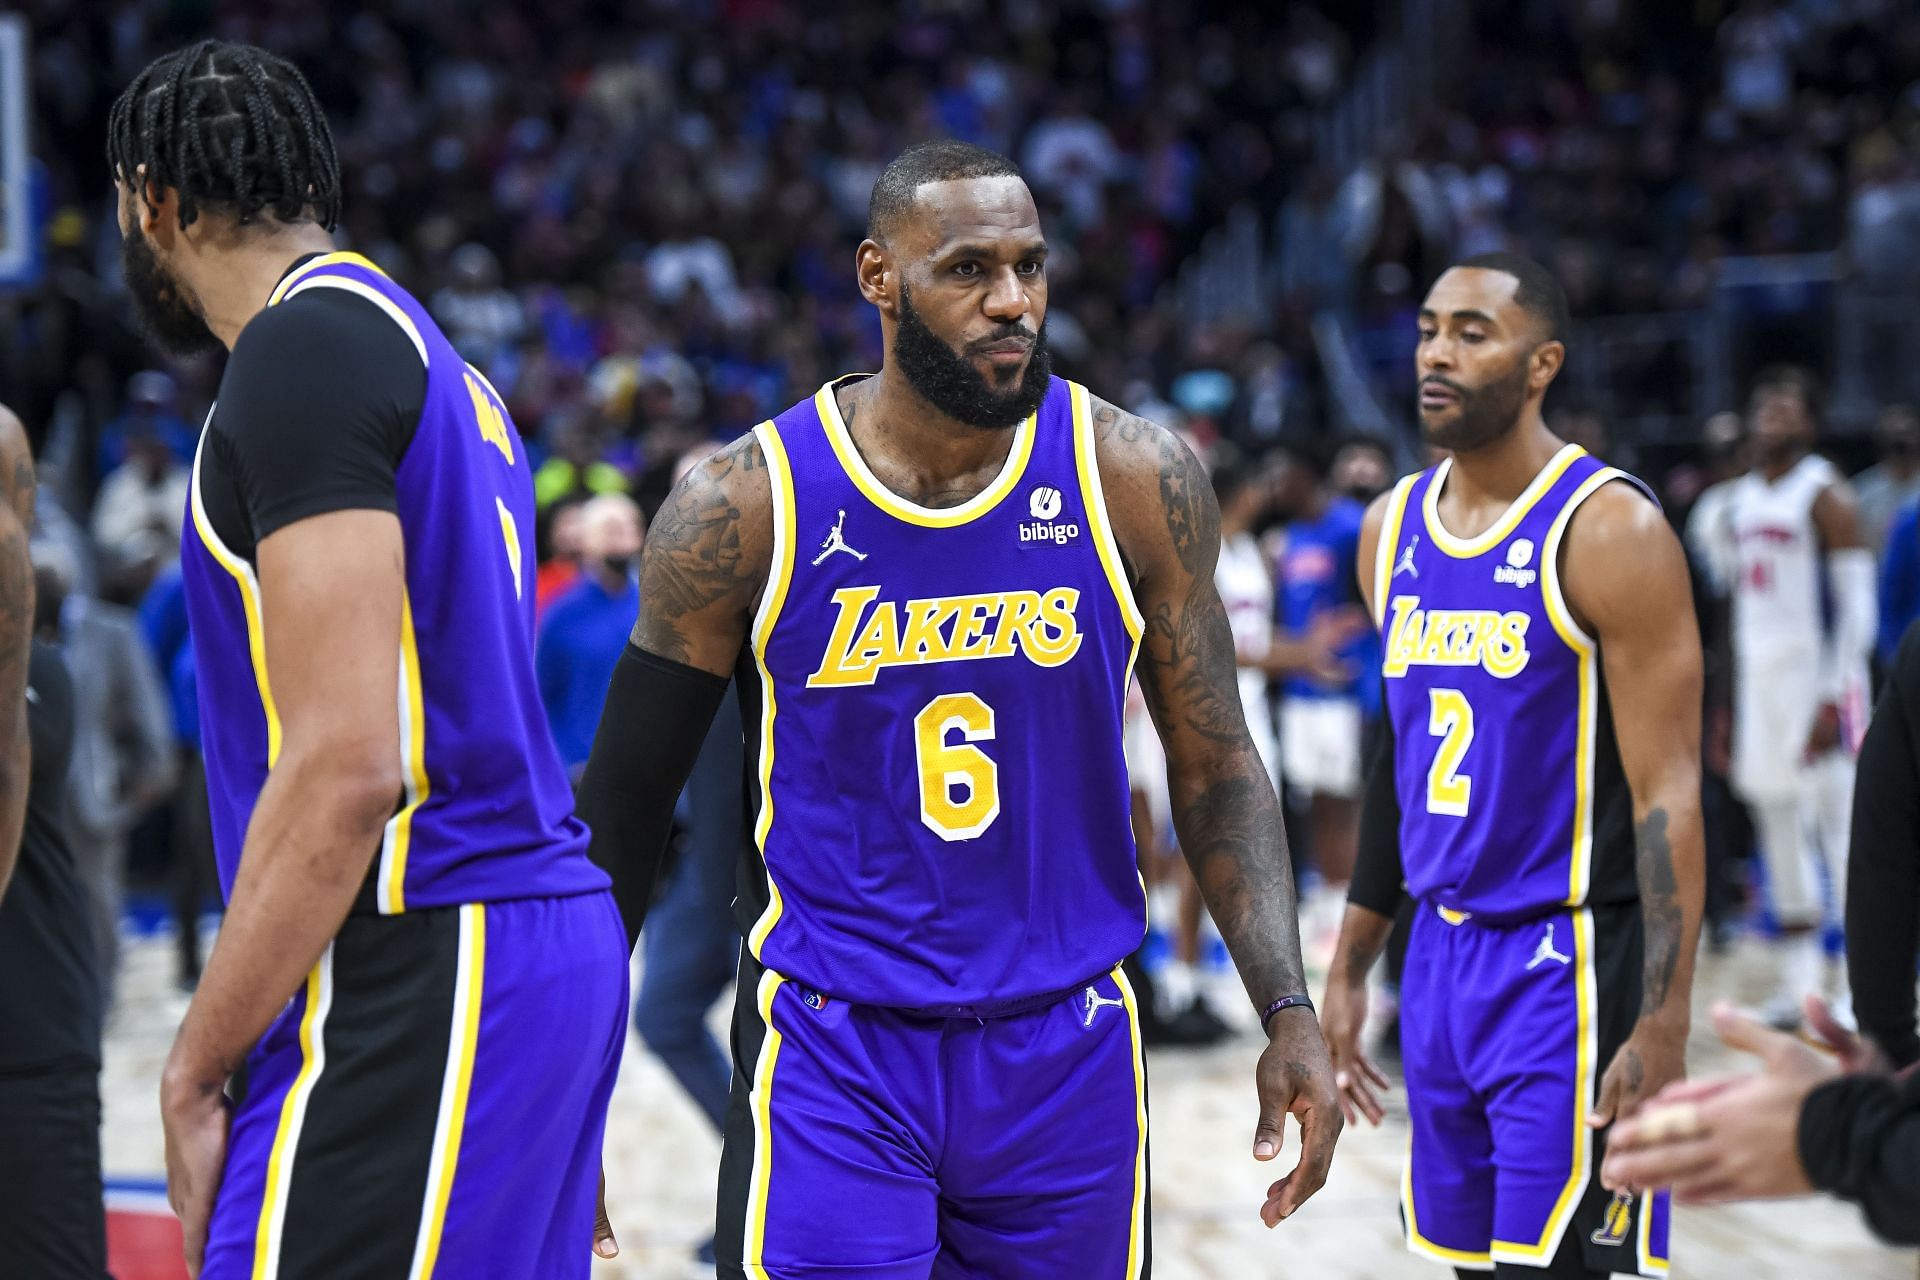 Los Angeles Lakers All-Star LeBron James after being ejected